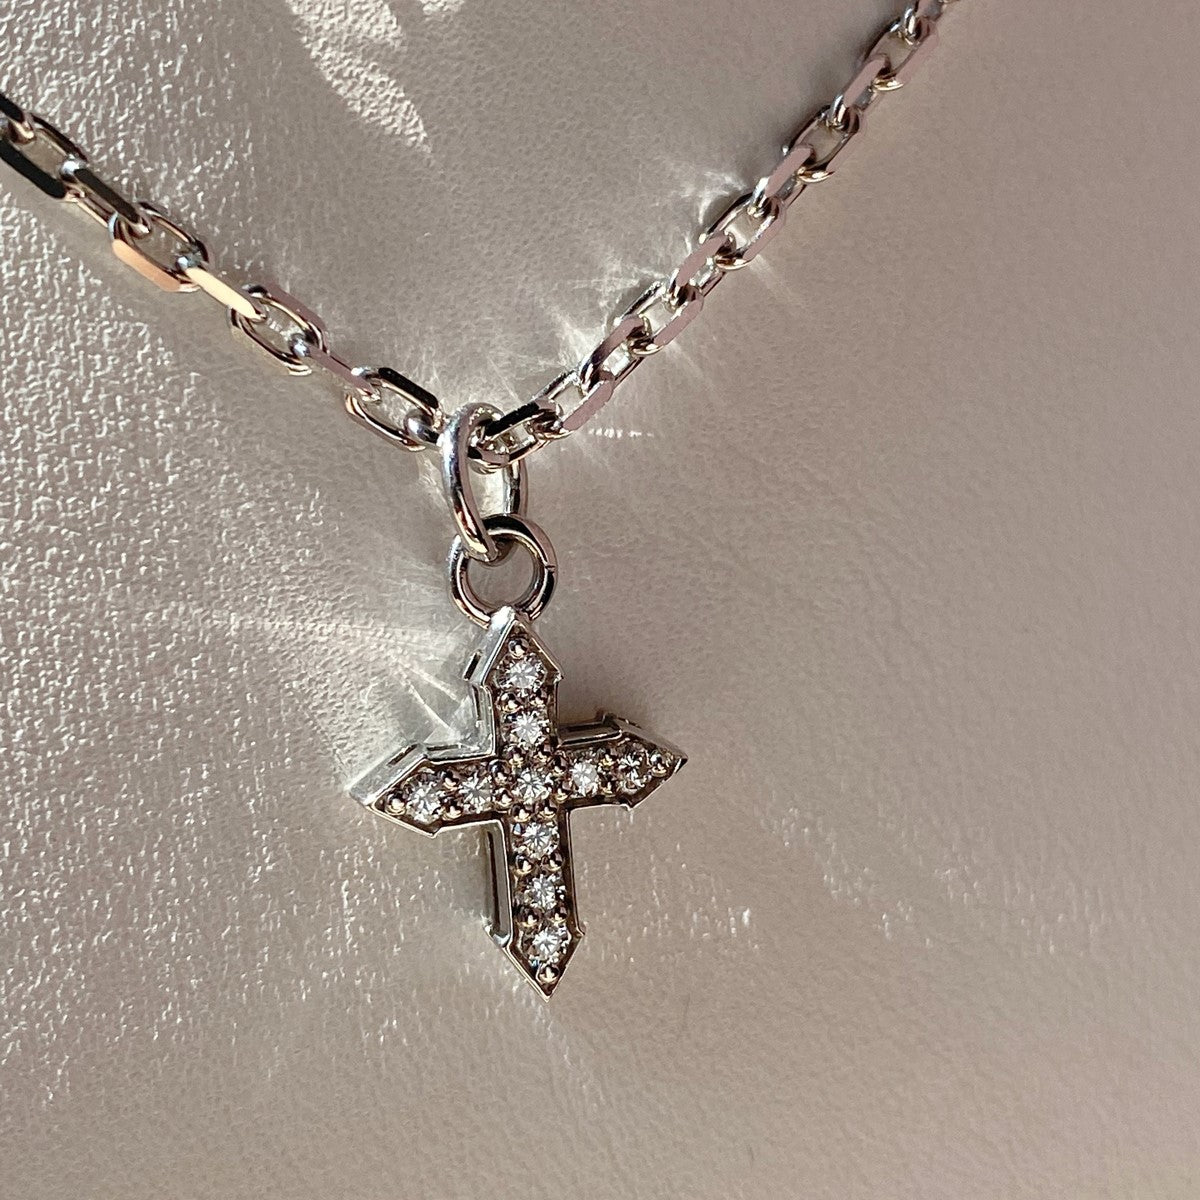 PENDANT CROSS "GLOW" WITH WHITE DIAMONDS ON A SILVER CHAIN / SOLID GOLD